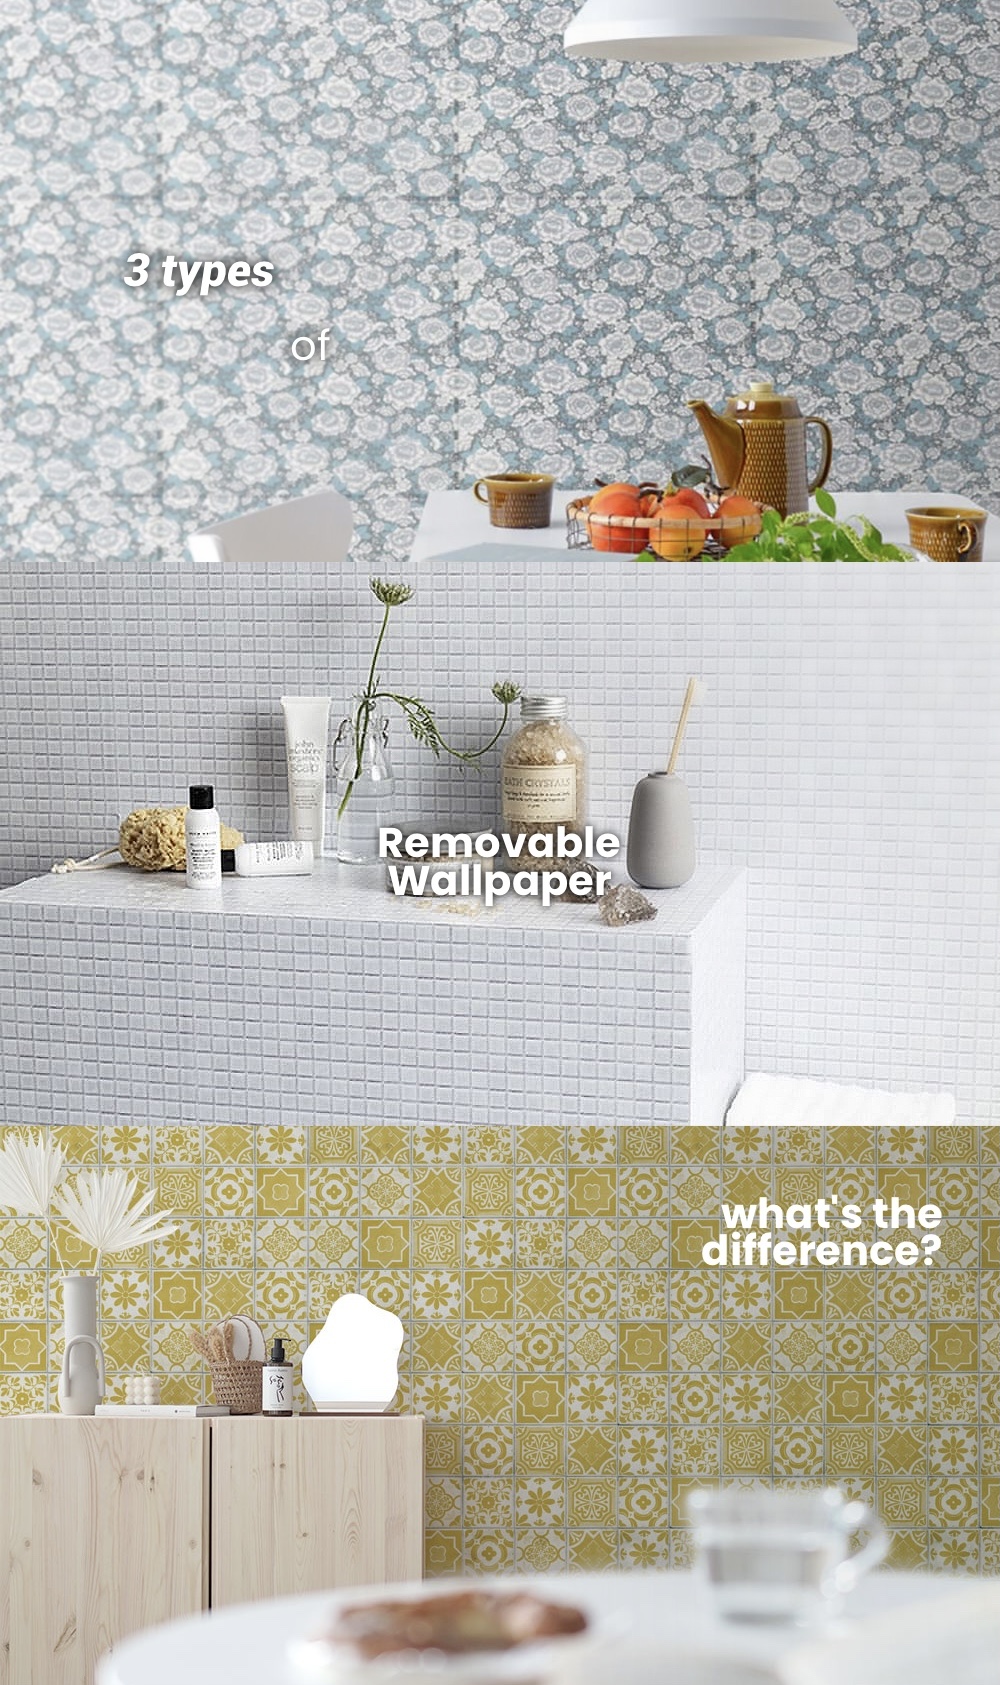 there are 3 types of removable wallpaper